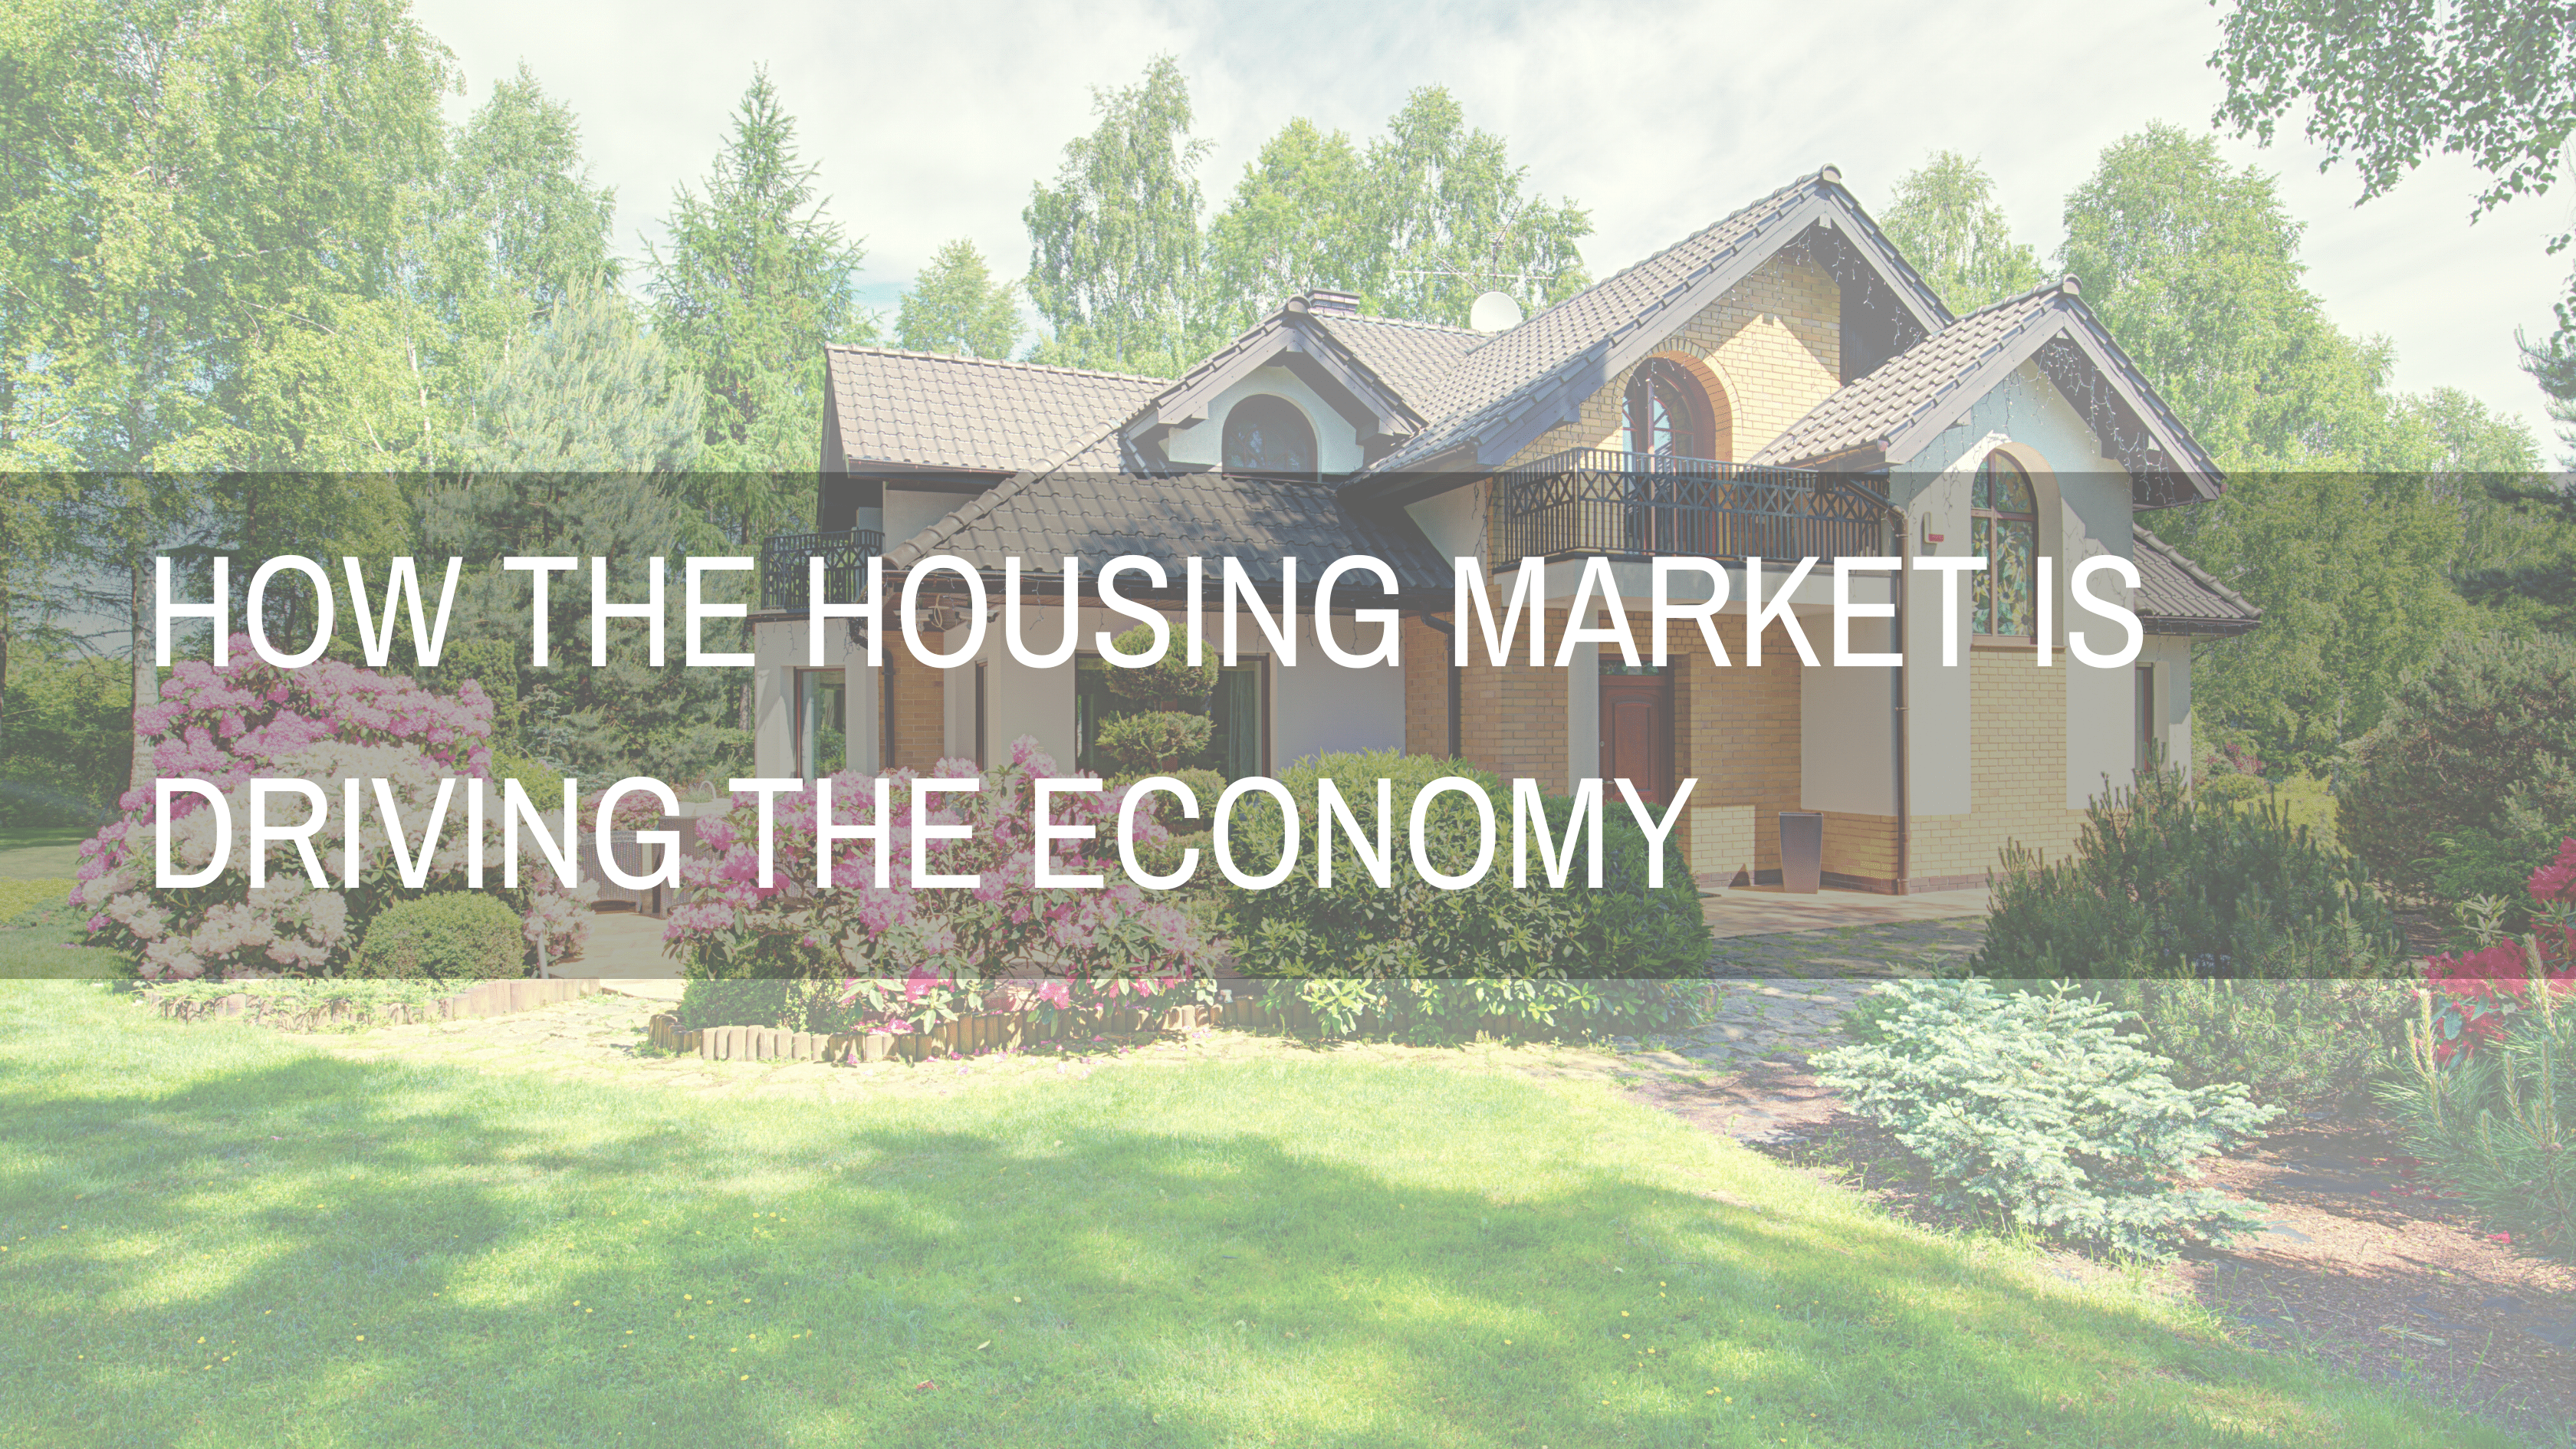 housing market is driving the economy